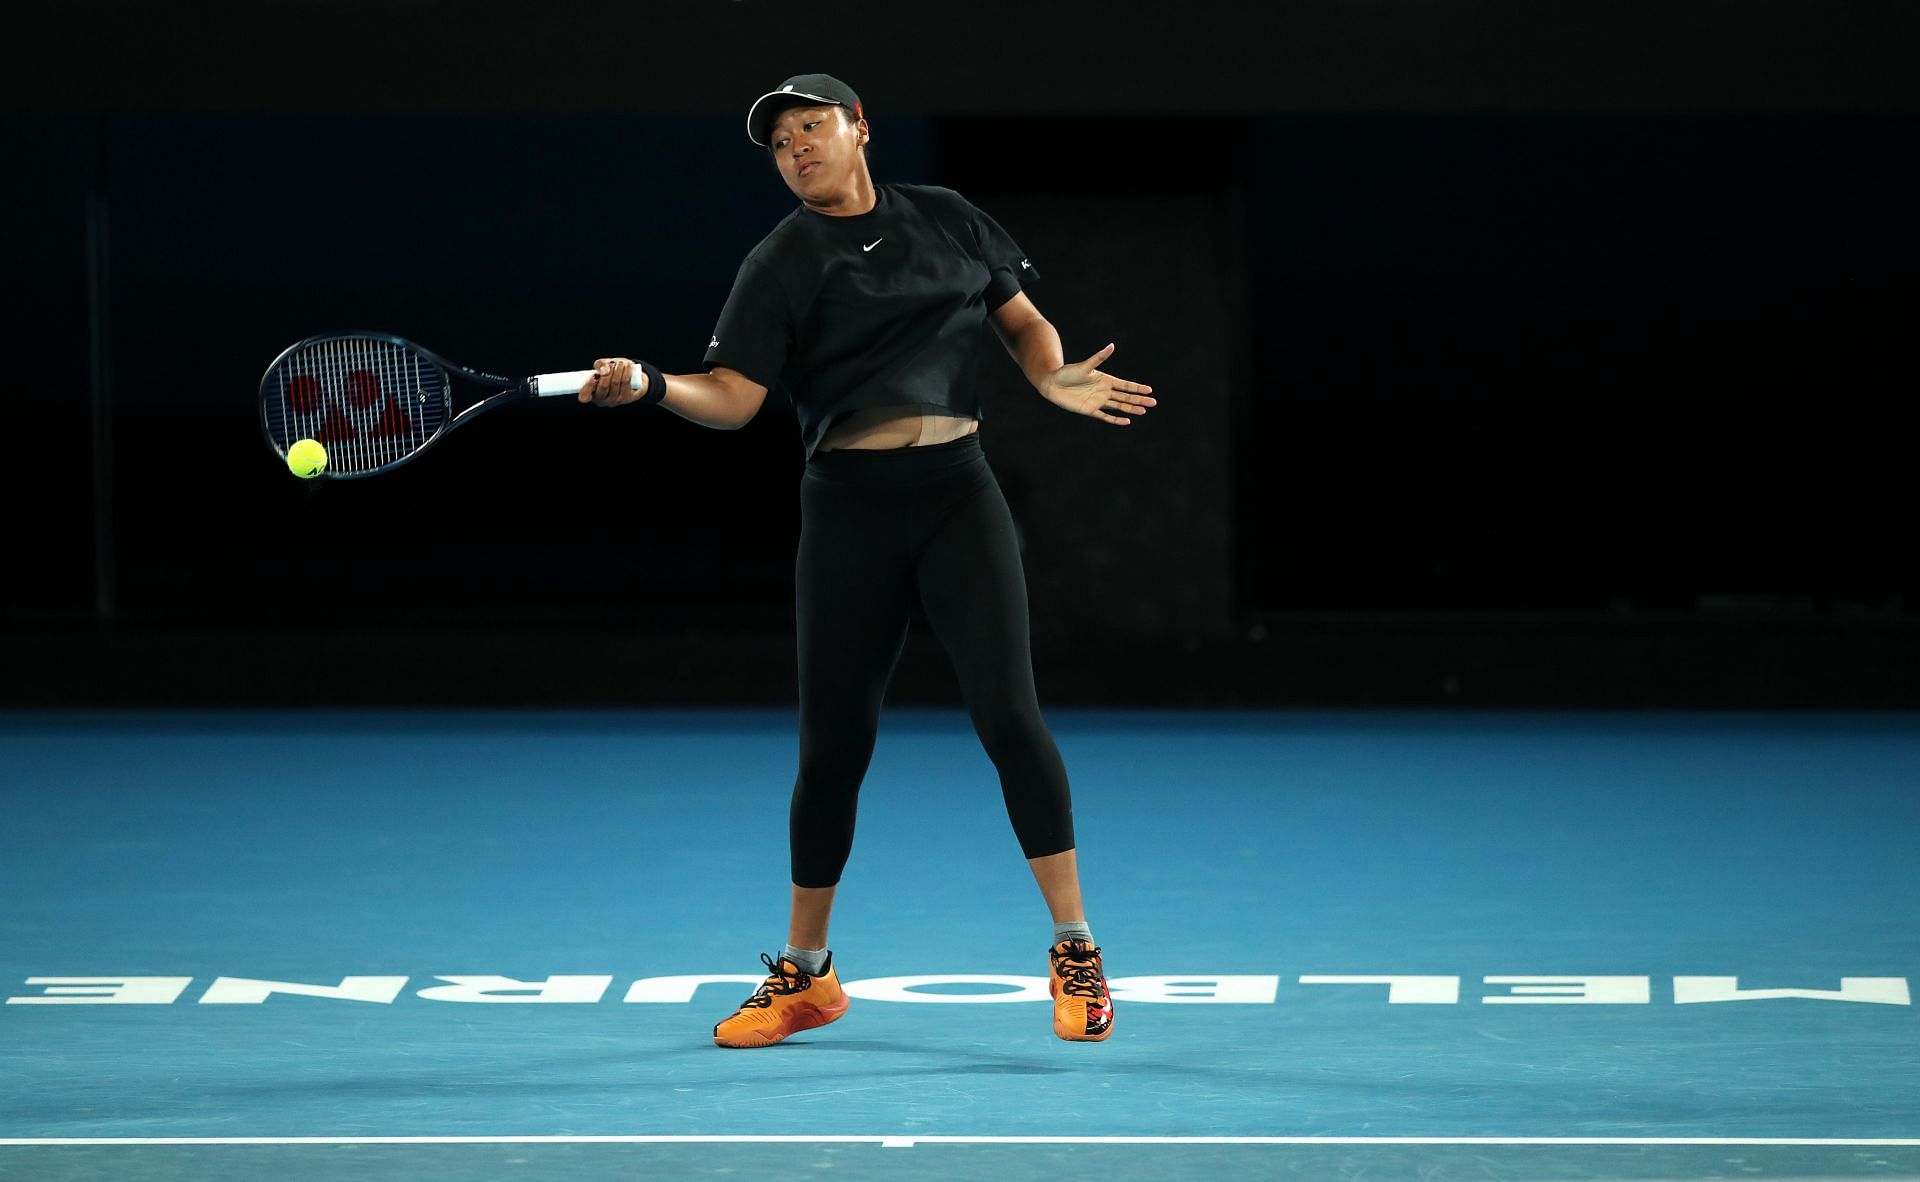 Naomi Osaka during a training session ahead of the Australian Open 2022